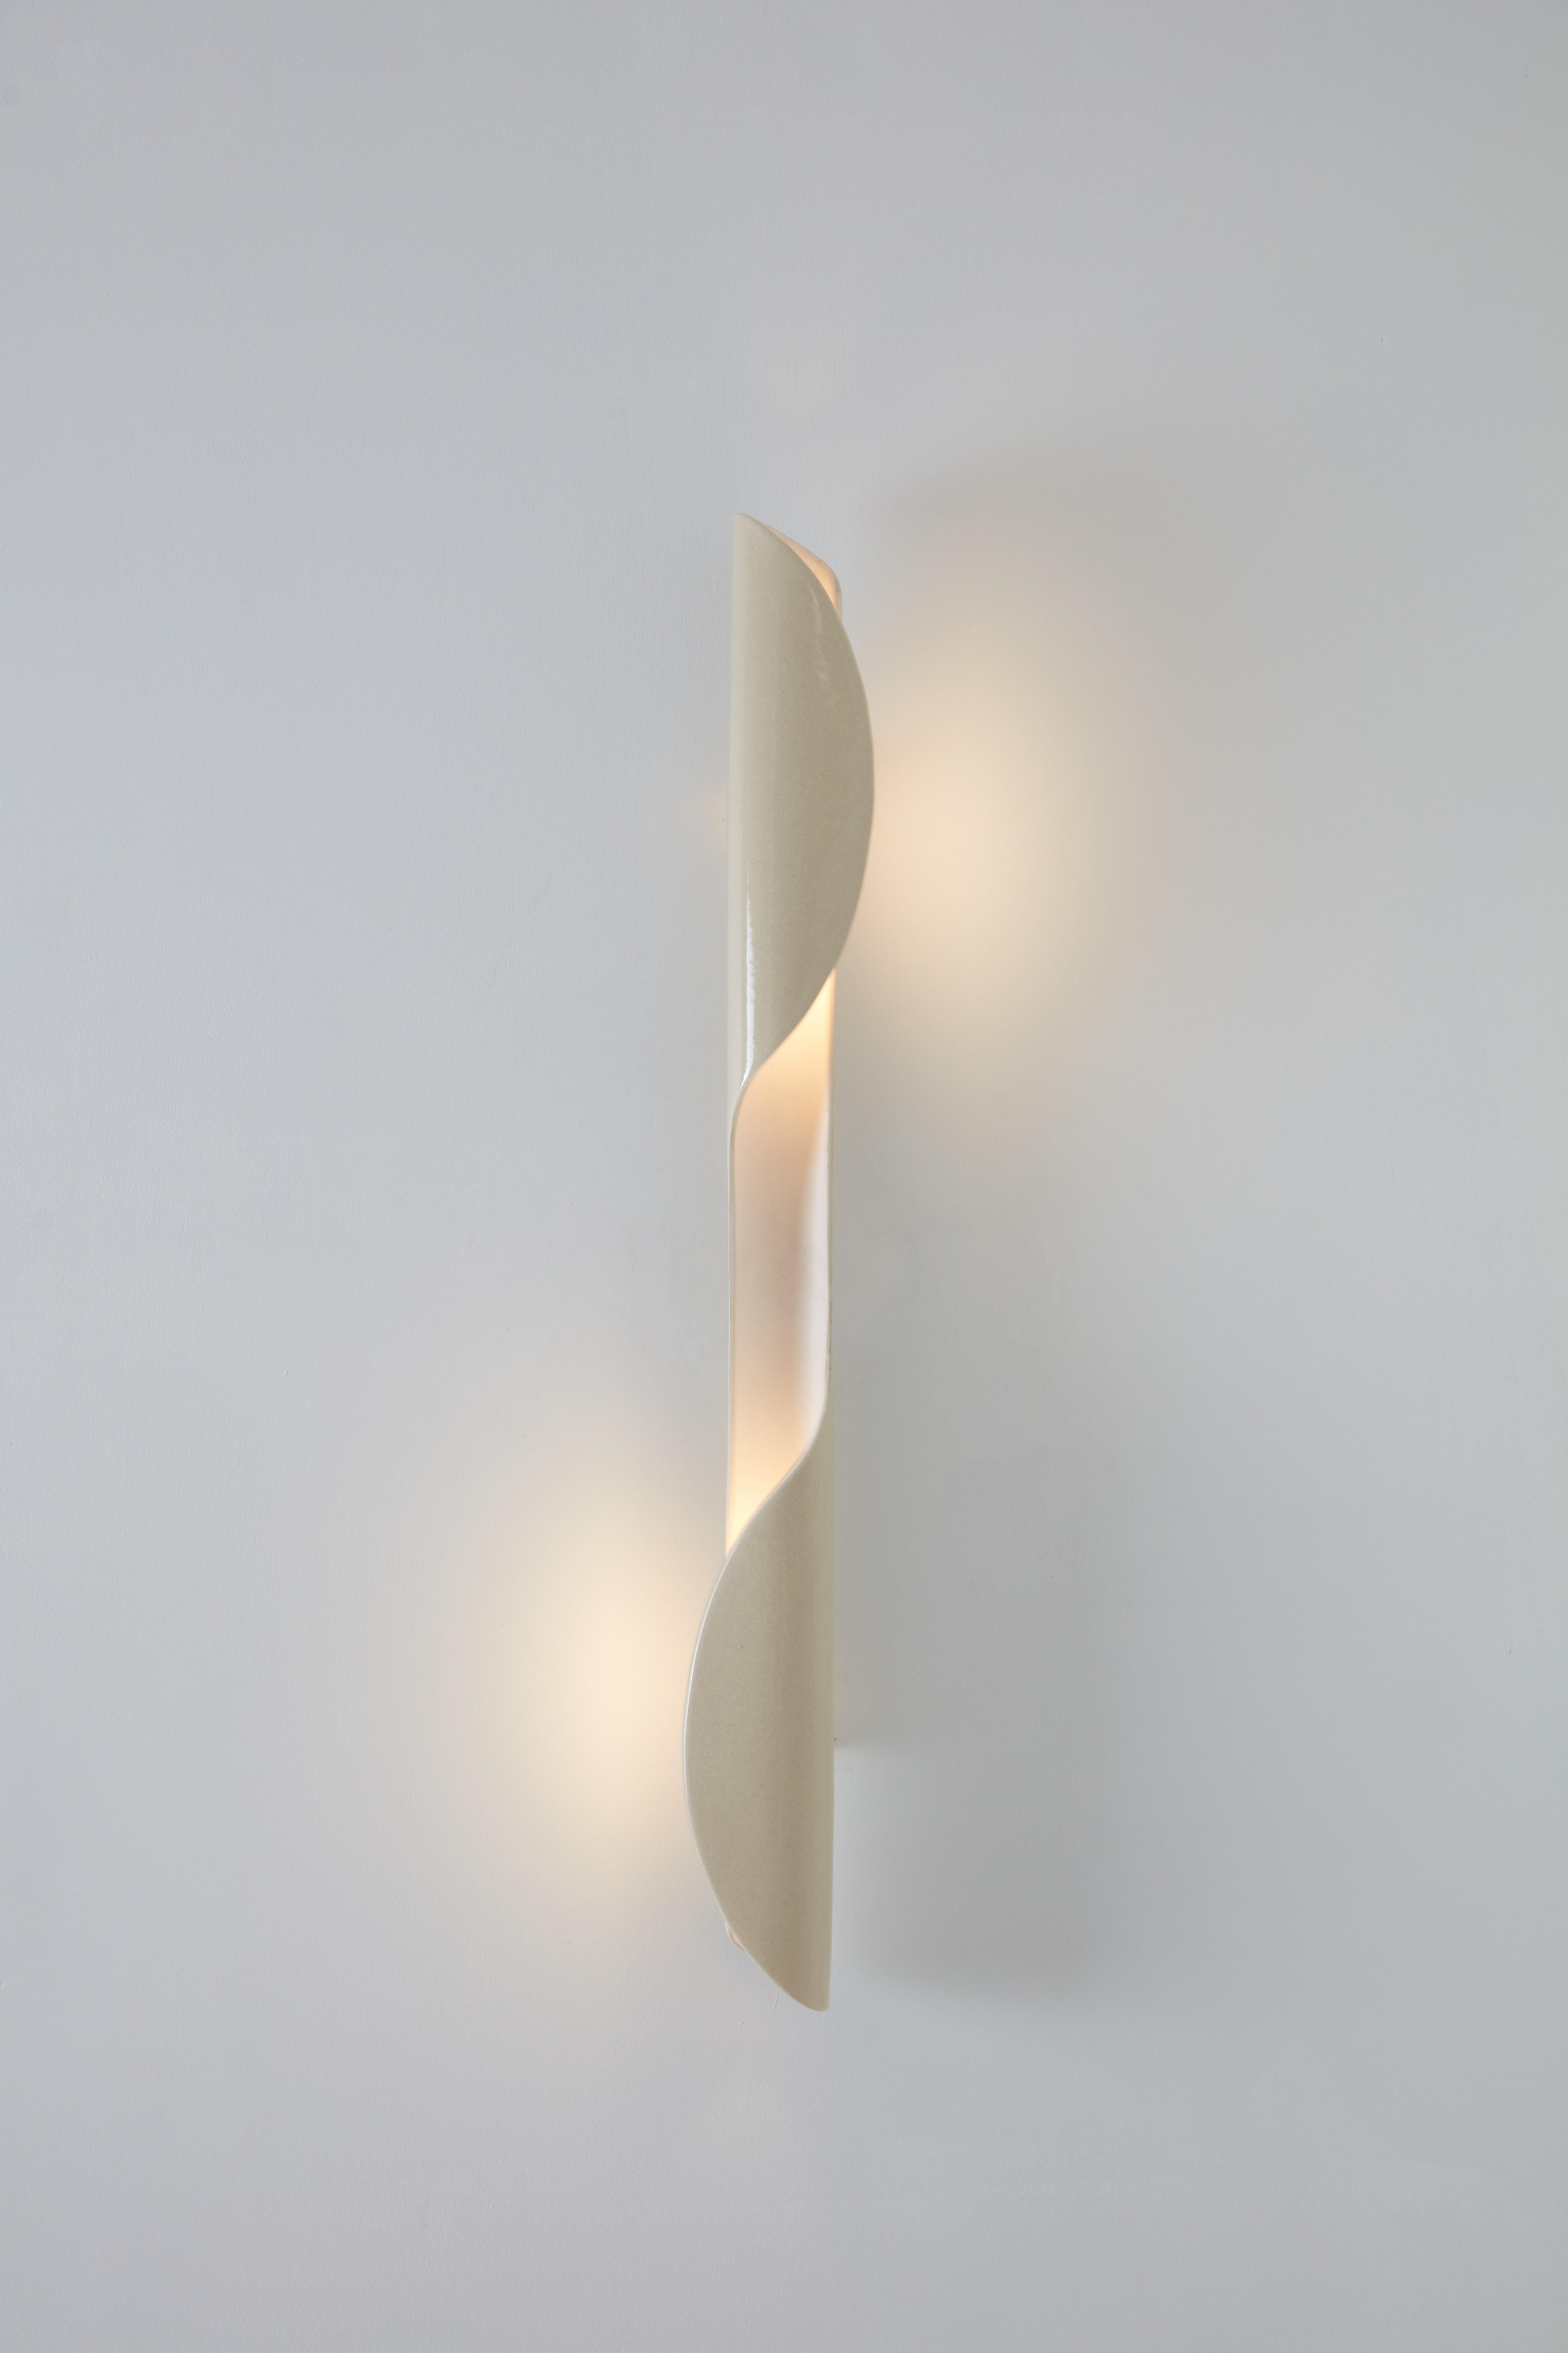 Torsade Ceramic wall lamp by Mydriaz
Dimensions: D 7 x W 7.8 x H 70 cm
Materials: Ceramic.
Available in other finishes: Pale gold on sandblasted brass, pale gold on polished brass.

Our products are handmade in our workshop. Dimensions and